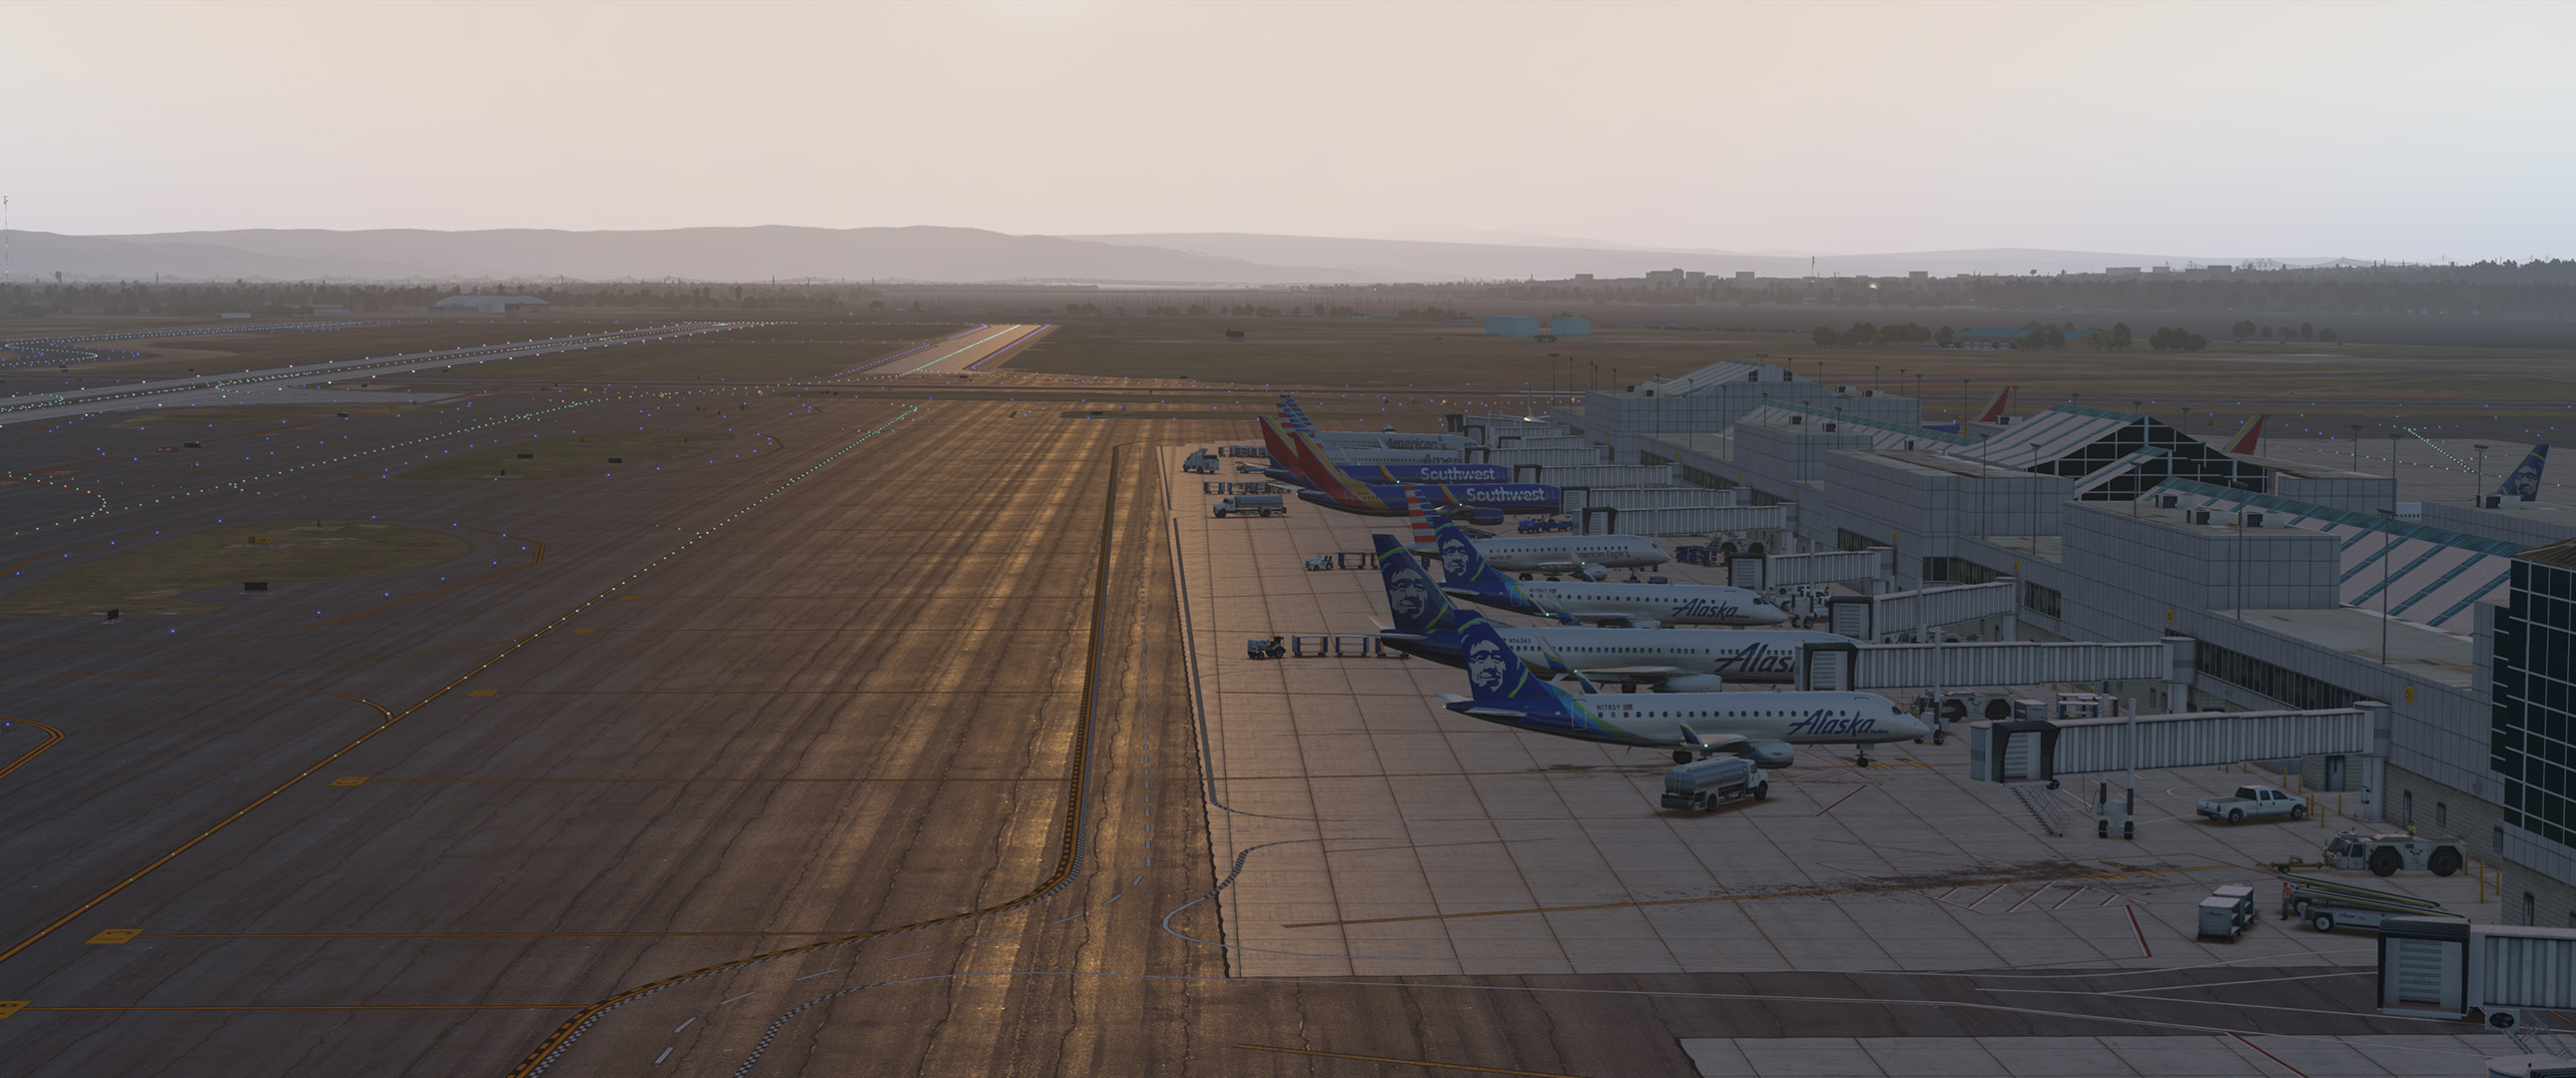 Best Freeware Sceneries for X-Plane 11 image 98